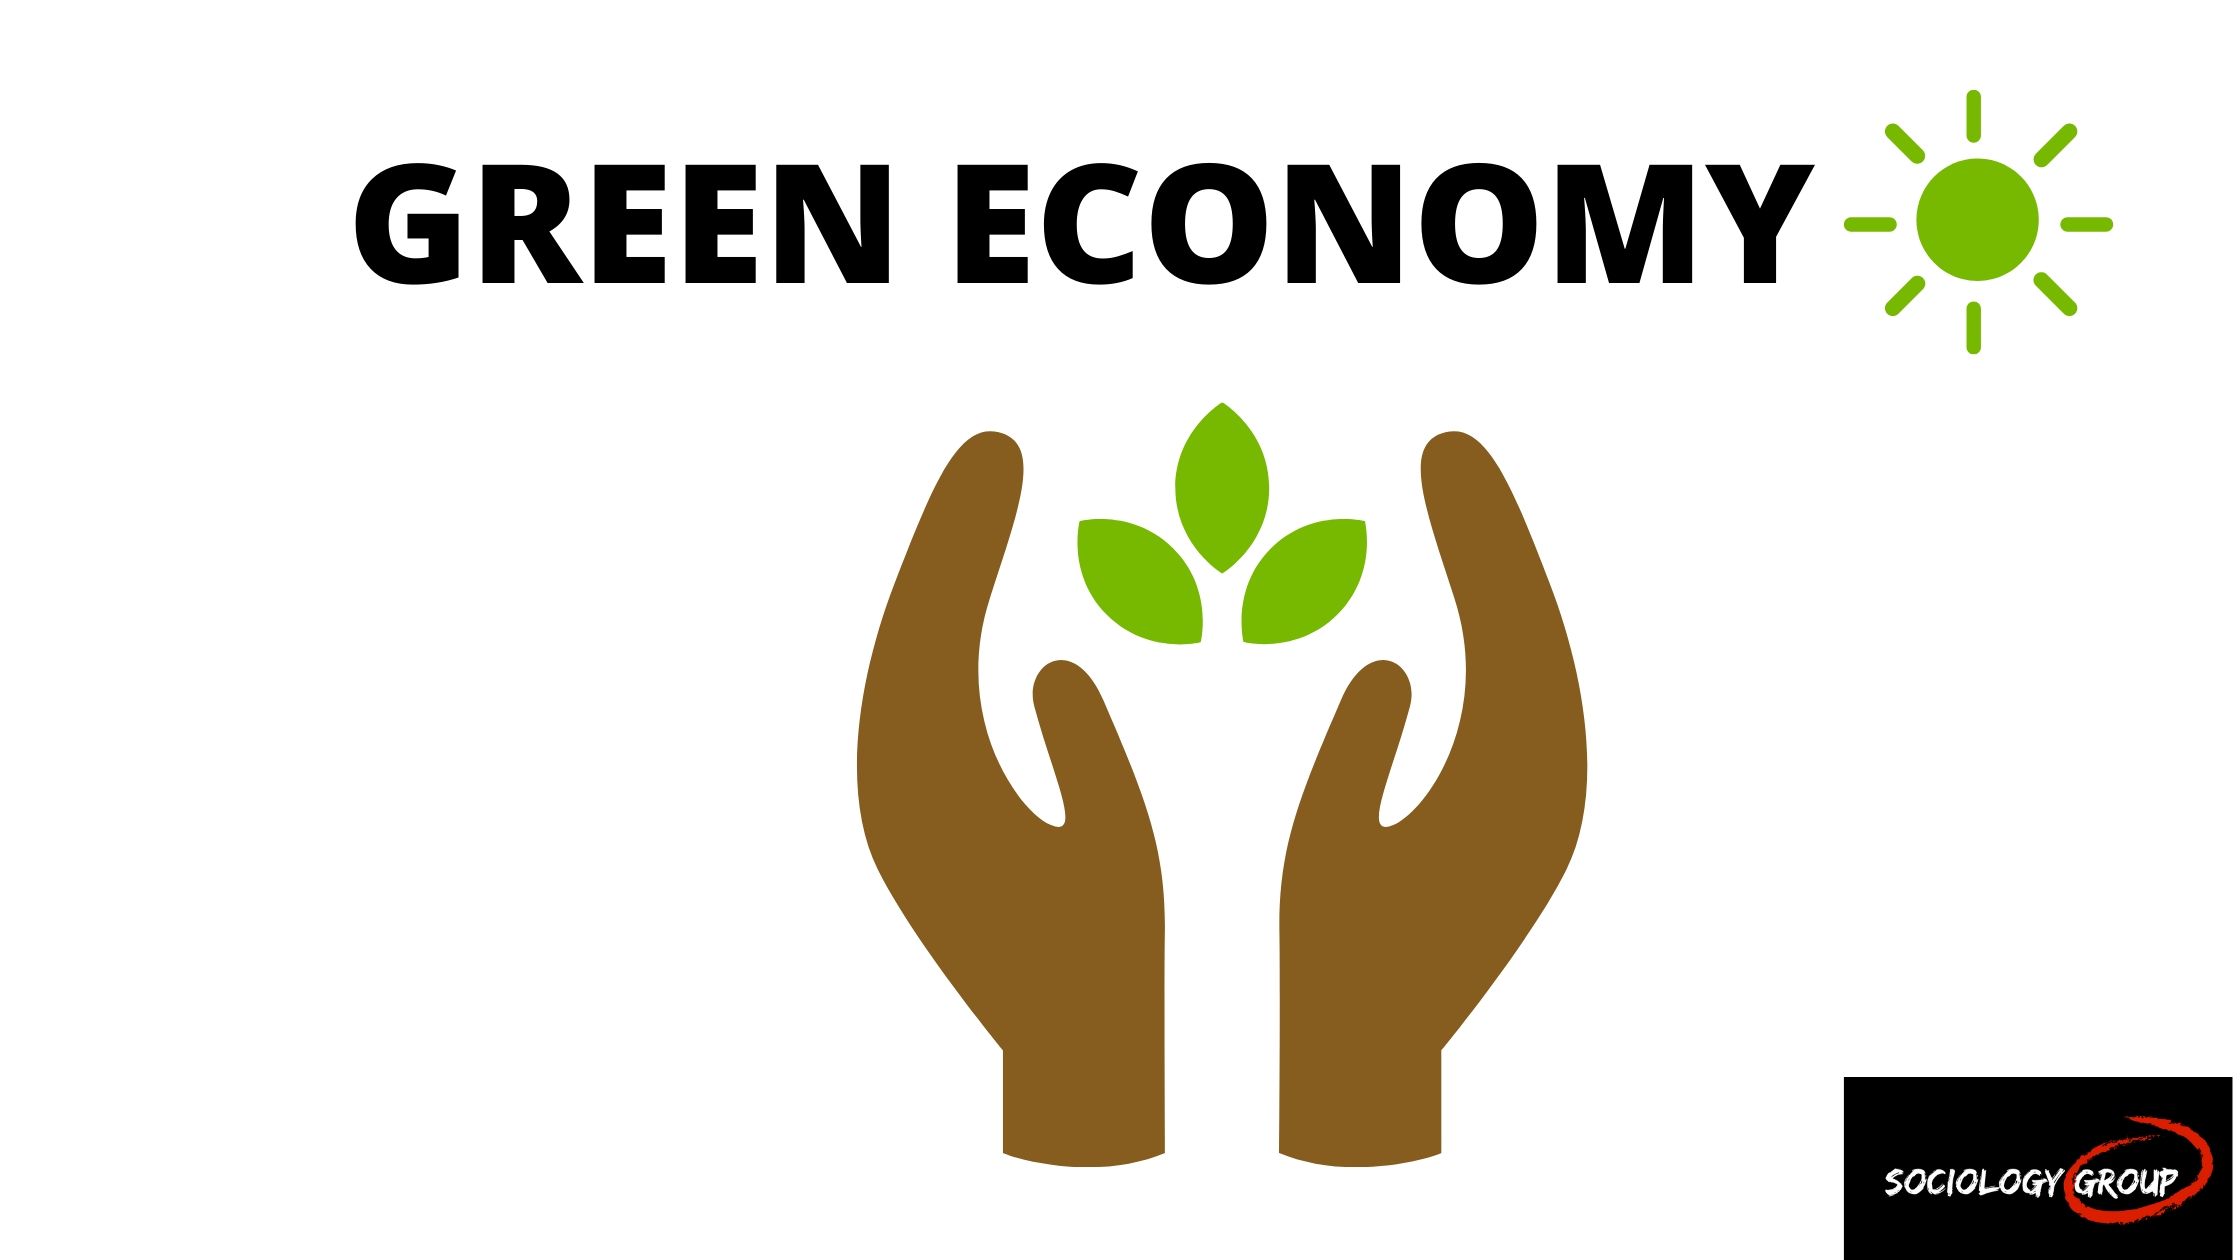 GREEN ECONOMY MEANING AND OVERVIEW